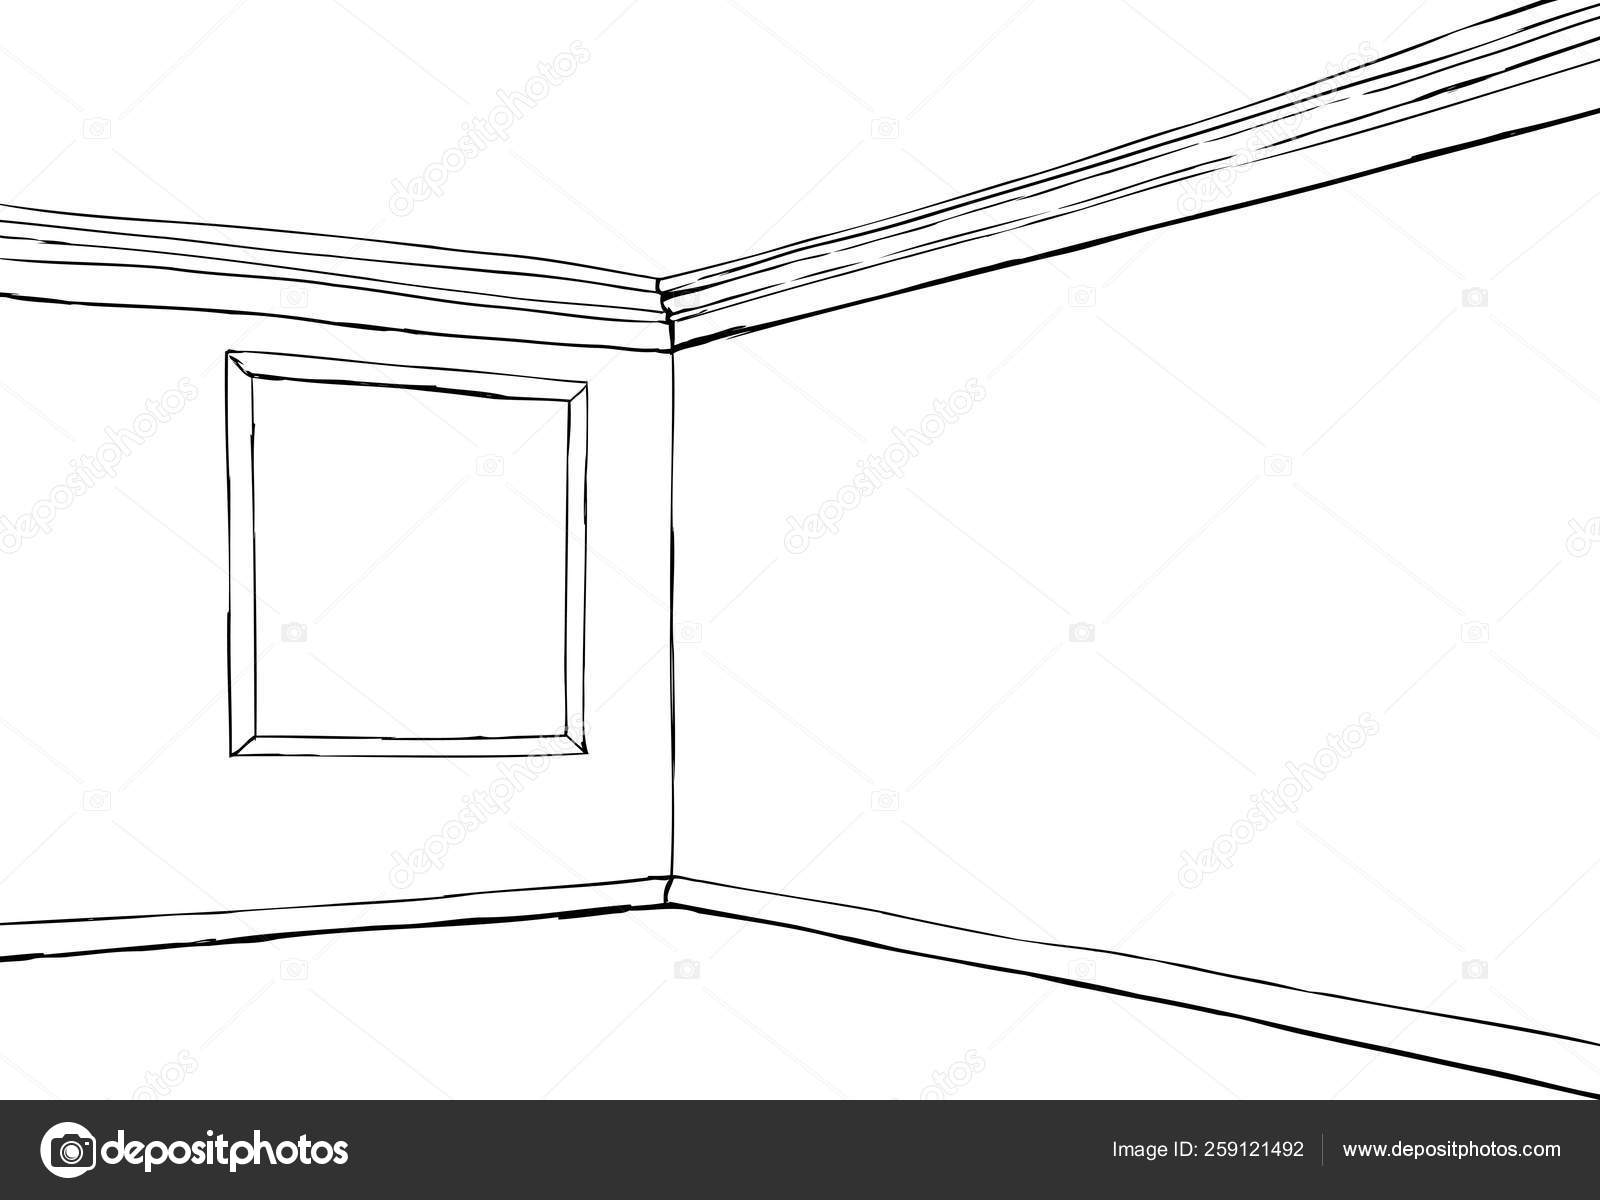 Cartoon Empty Room Background Square Frame Corner Stock Photo by ©YAYImages  259121492